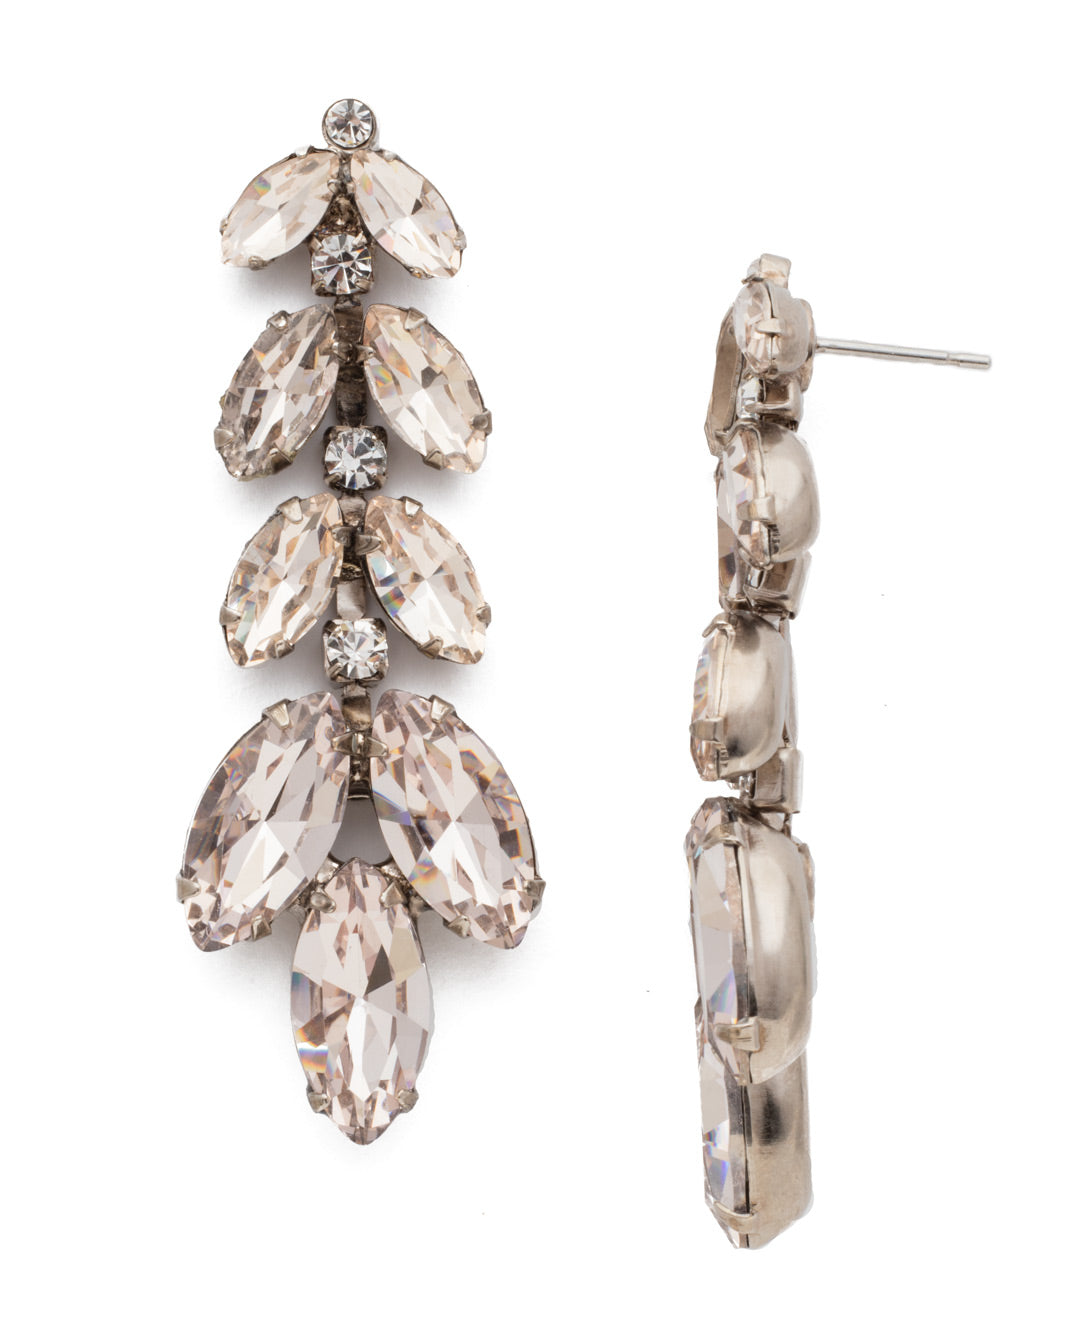 Repeating Navette Dangle Earrings - ECZ2ASPLS - <p>This dynamic drop earring evokes the essence of nature with it's leaf-like inspired design. Featuring paired navette crystals alternating with single round stones, this silhouette is sure to inspire your everyday look! From Sorrelli's Soft Petal collection in our Antique Silver-tone finish.</p>